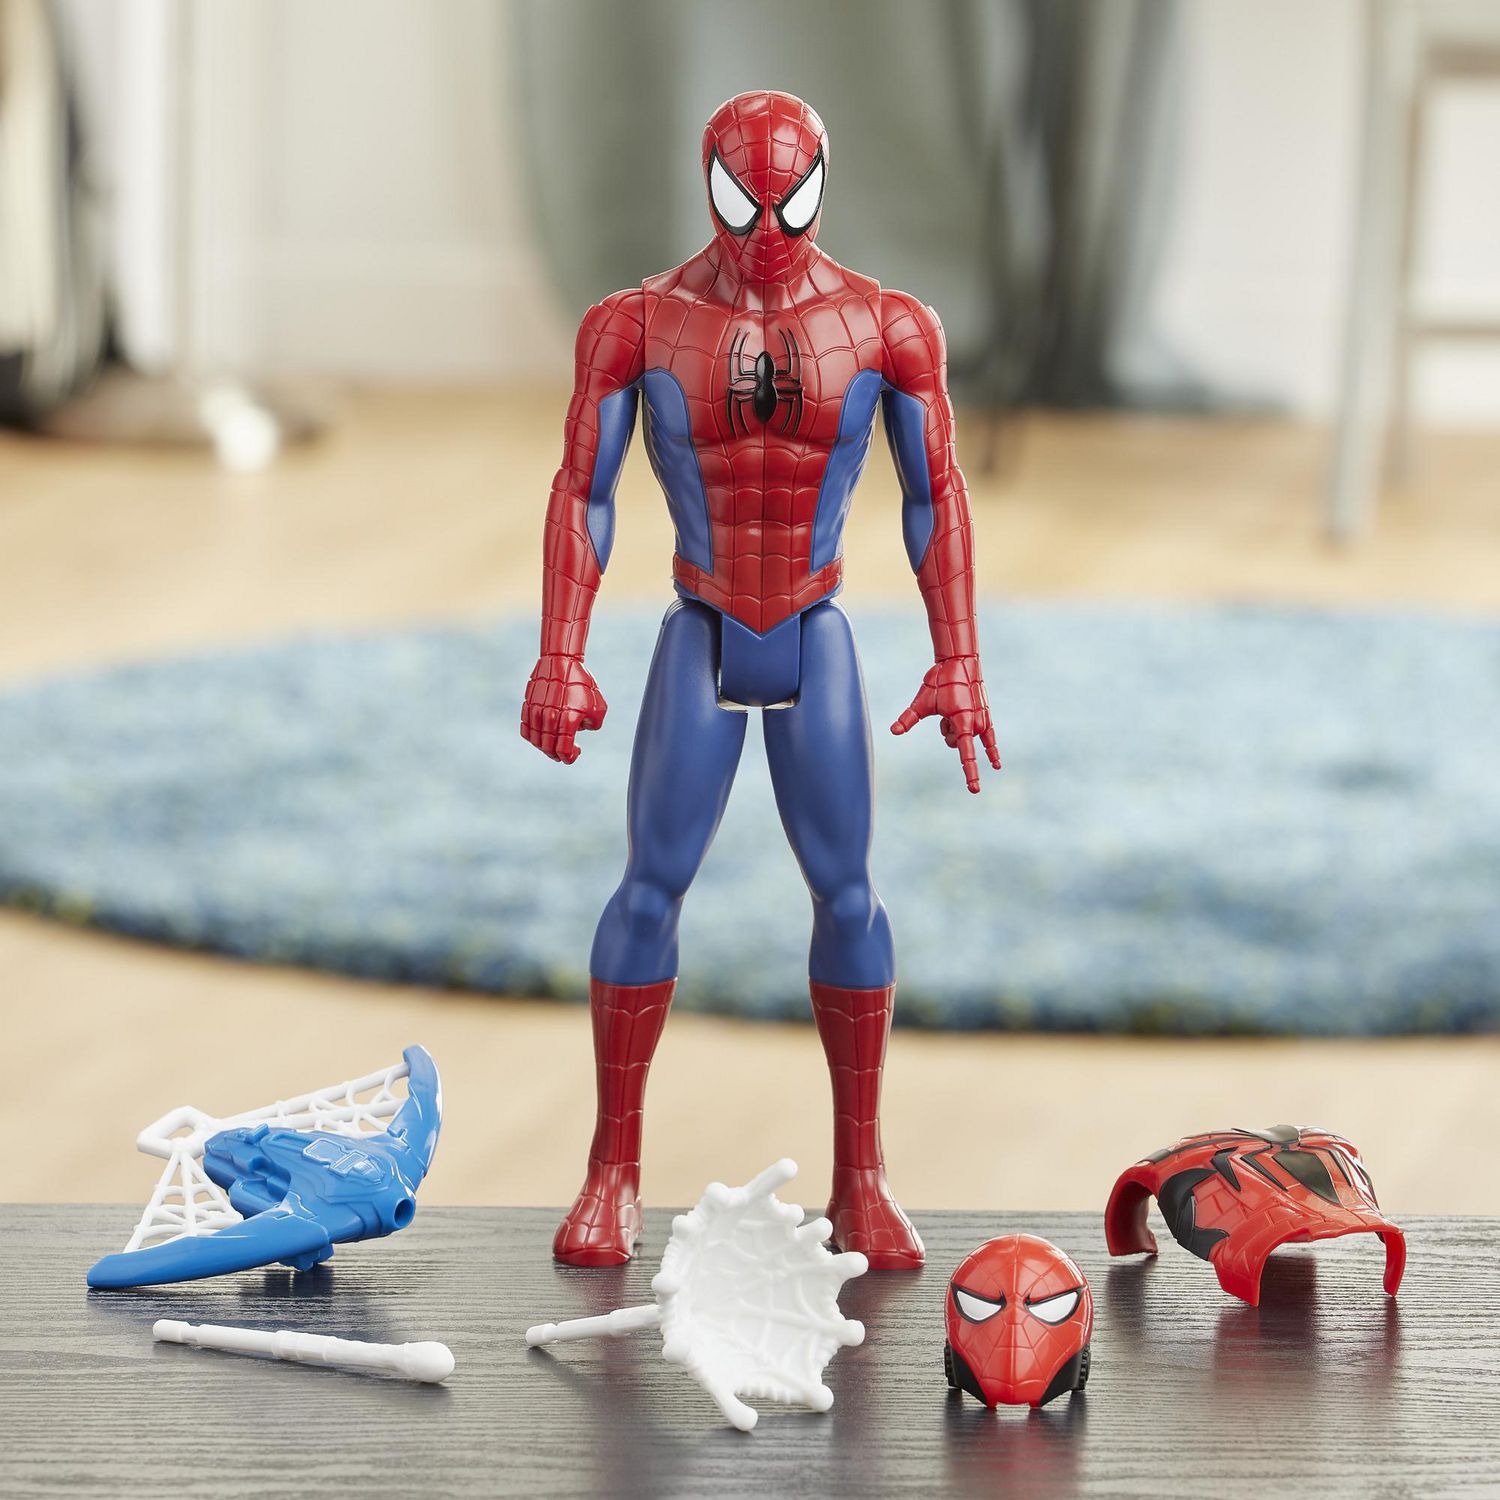 Details about  / Marvel Spiderman Titan Heroes Series Blast Gear Collection 3 Pack E9889//E9857